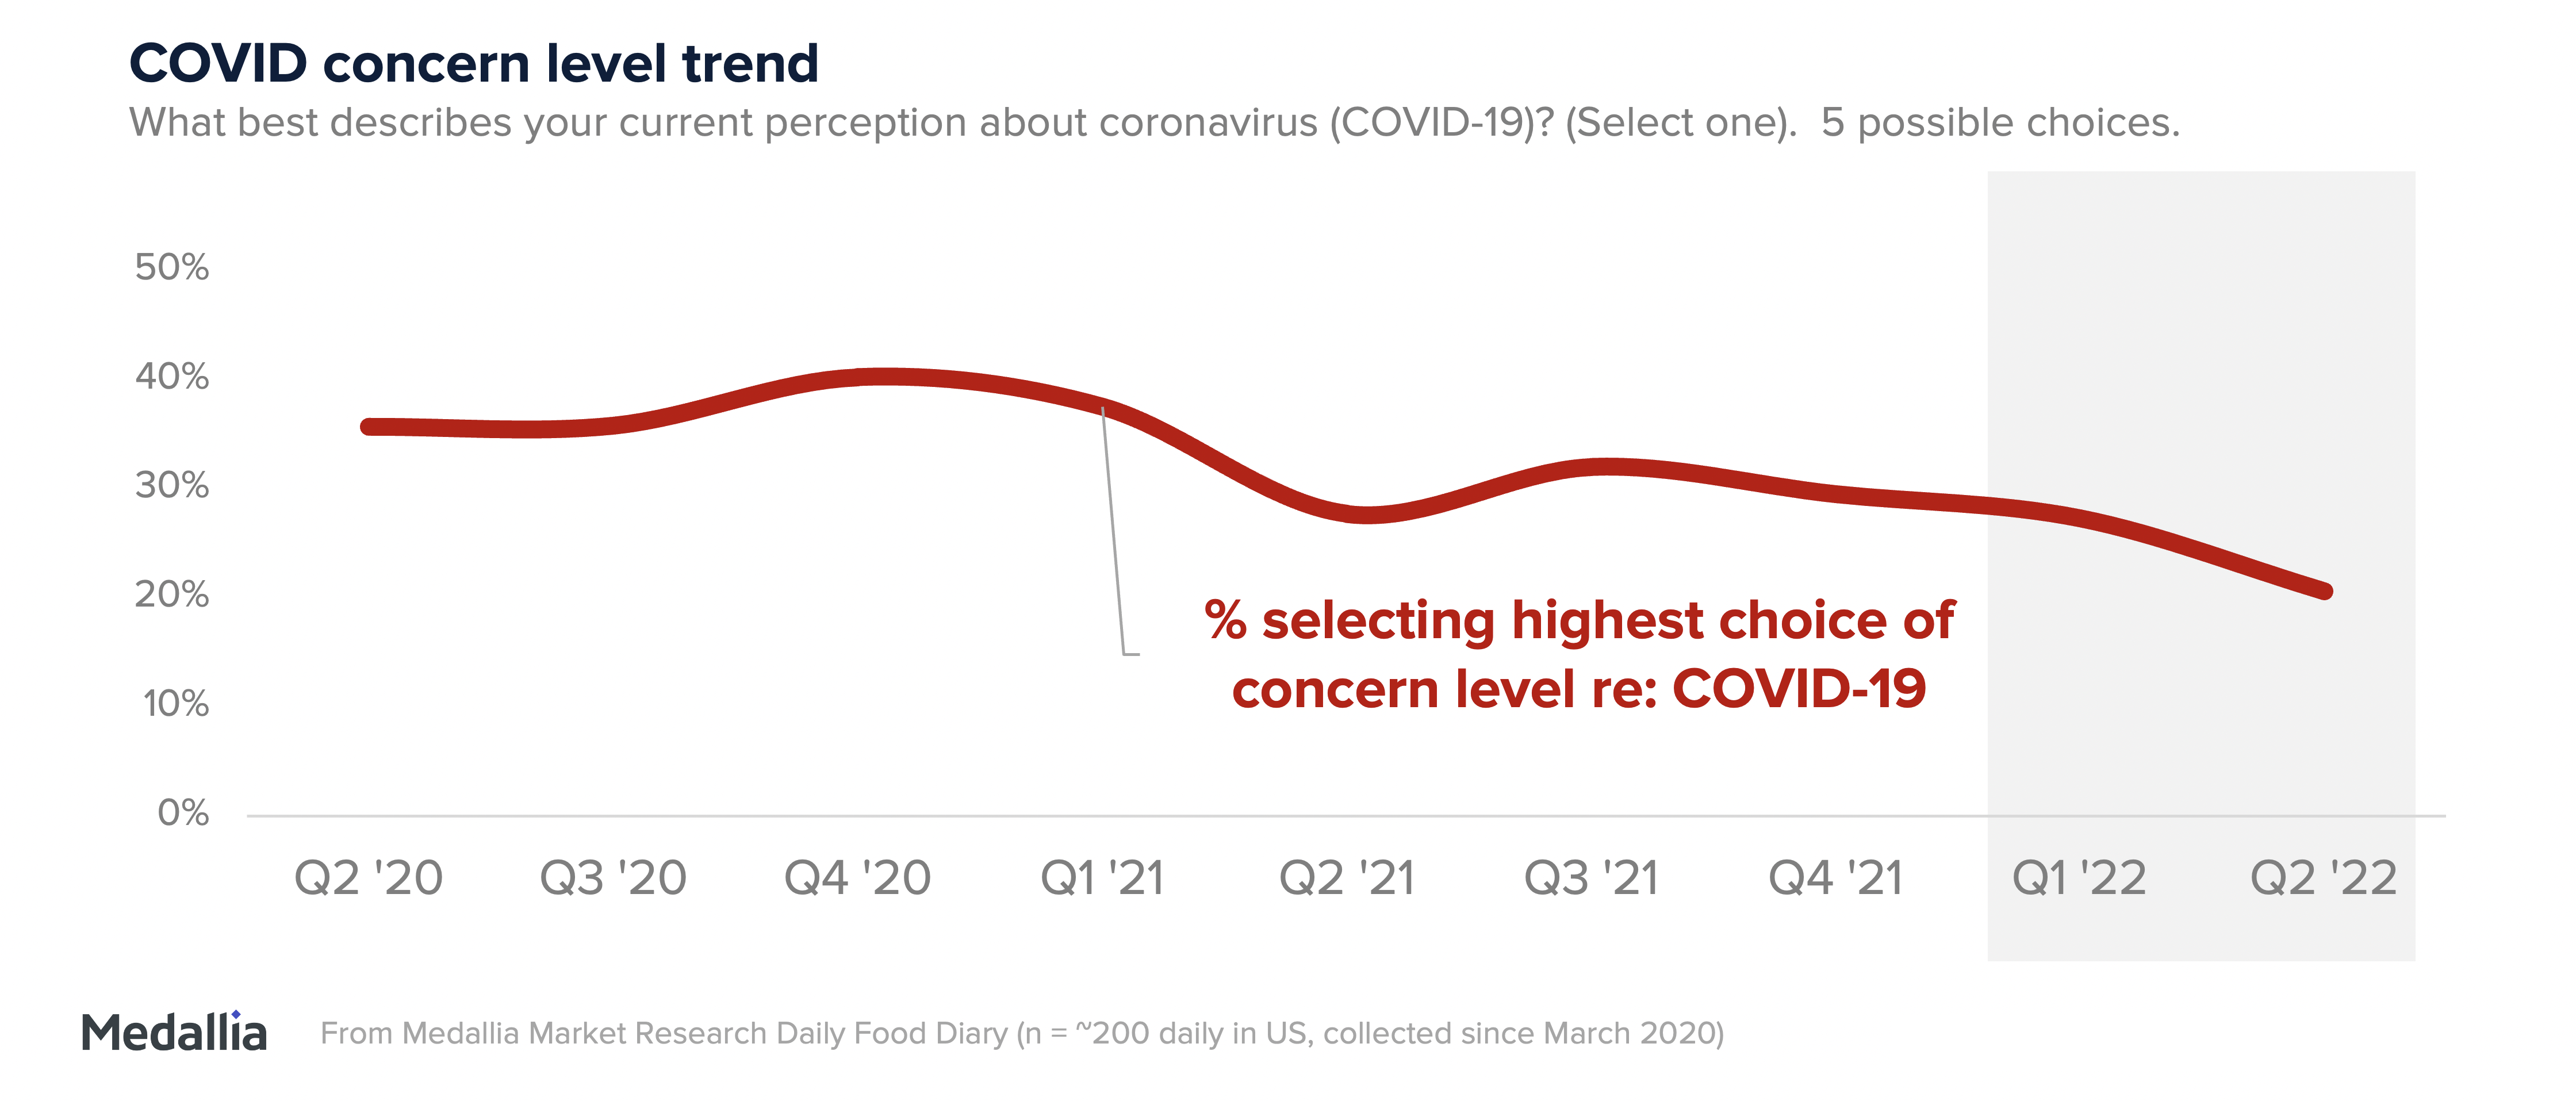 What best describes your current perception about coronavirus (Covid-19)? Q2 2020 hovered around 35% concern level and Q2 2022 was around 20%